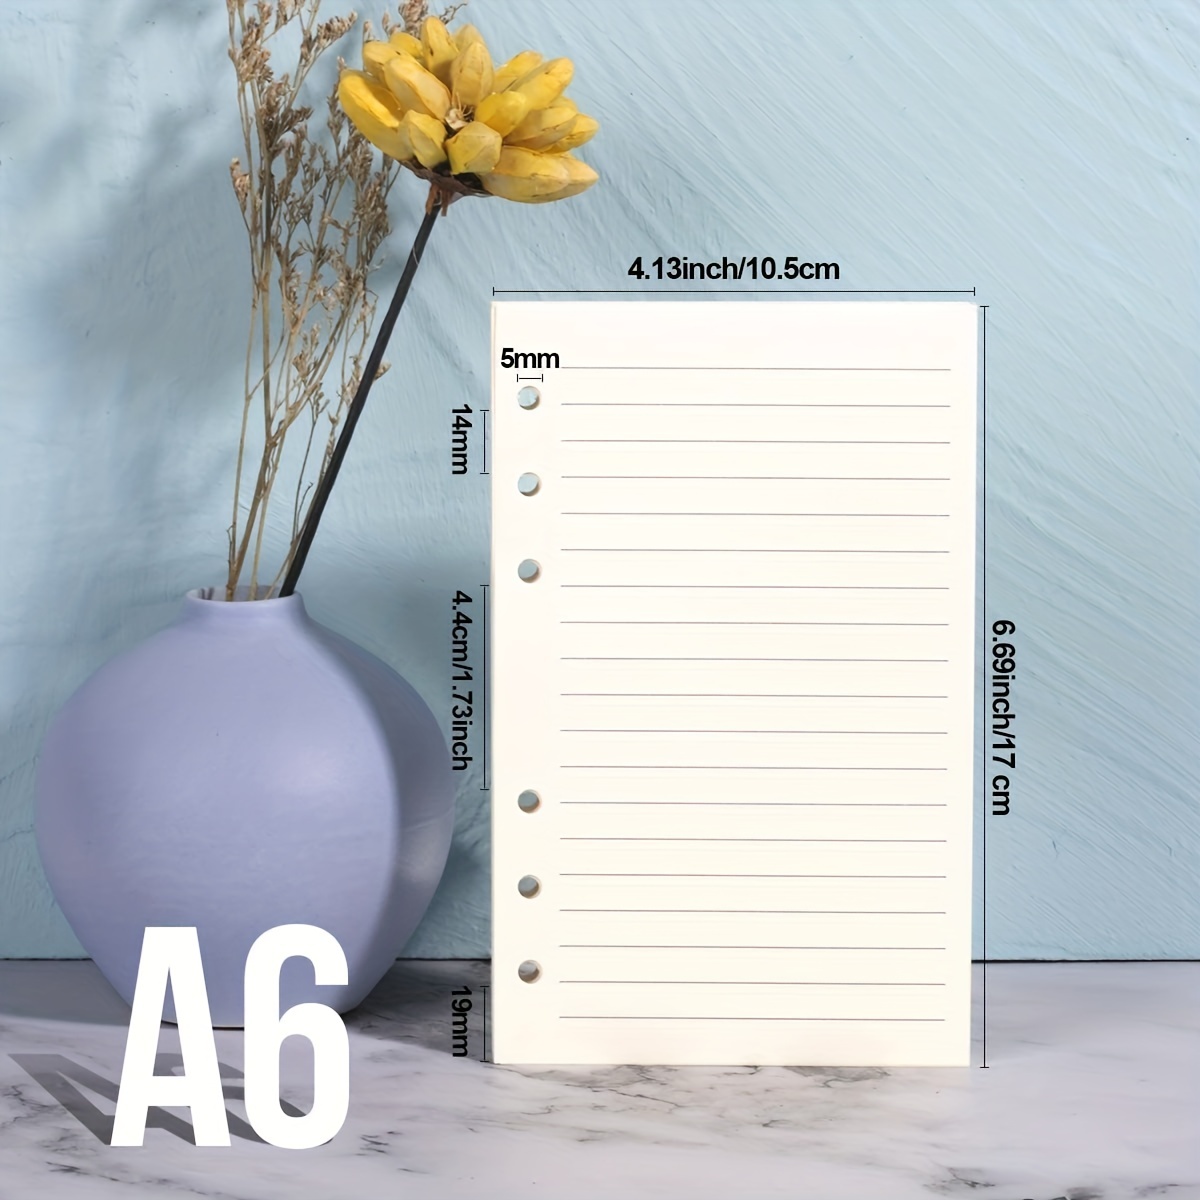 A6 Filler Paper, 6-Hole Punched for 6-Ring Binders, 8mm Ruled Loose Leaf Paper,10.5 x 16.9cm Inserts Paper, 80 Sheets/160 Pages, Beige, Lined